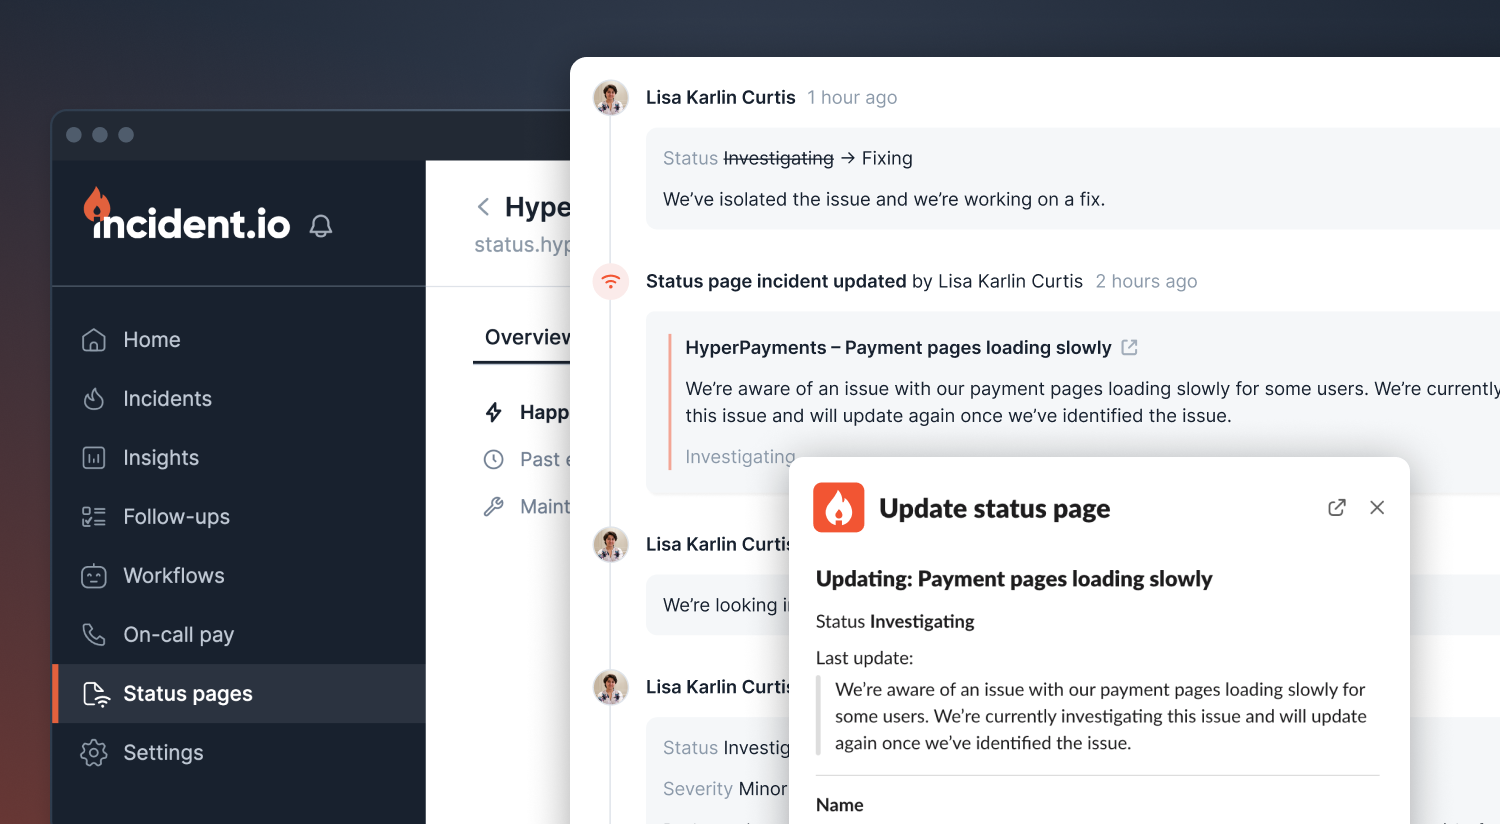 Status pages section in the incident.io dashboard